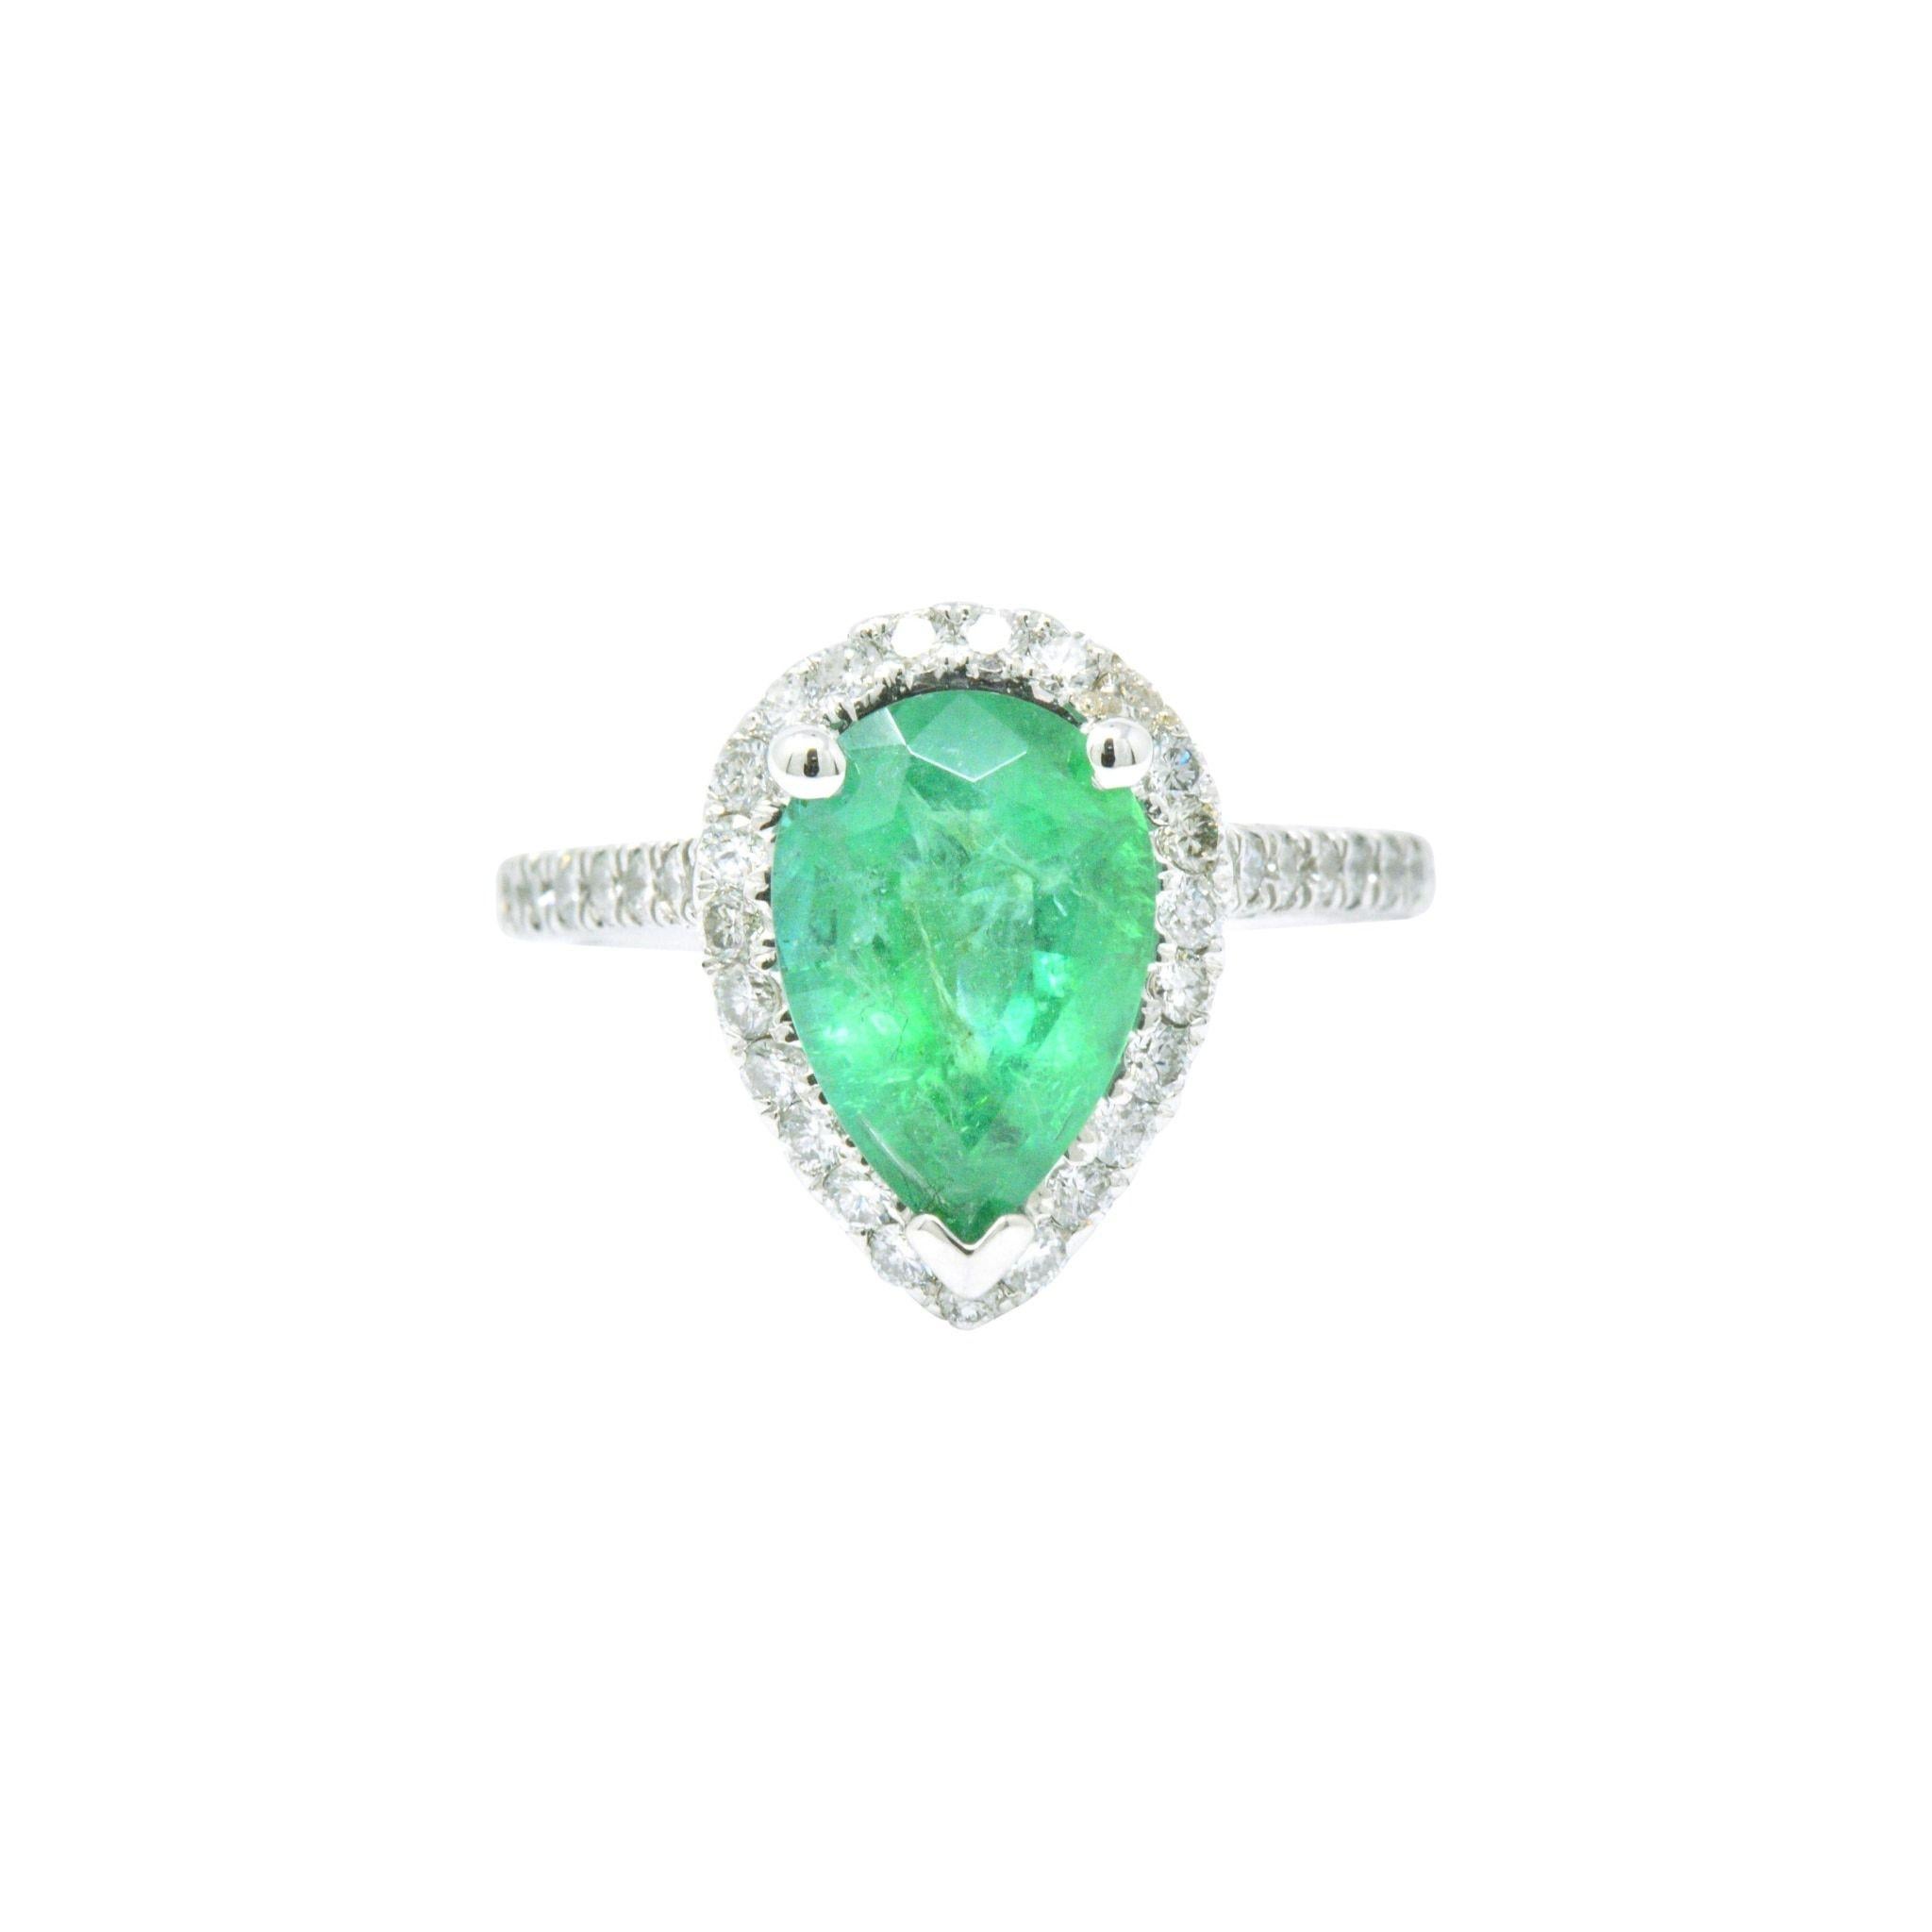 Centering a pear cut emerald weighing approximately 2.30 carats, bright springy green

In a round brilliant cut diamond 